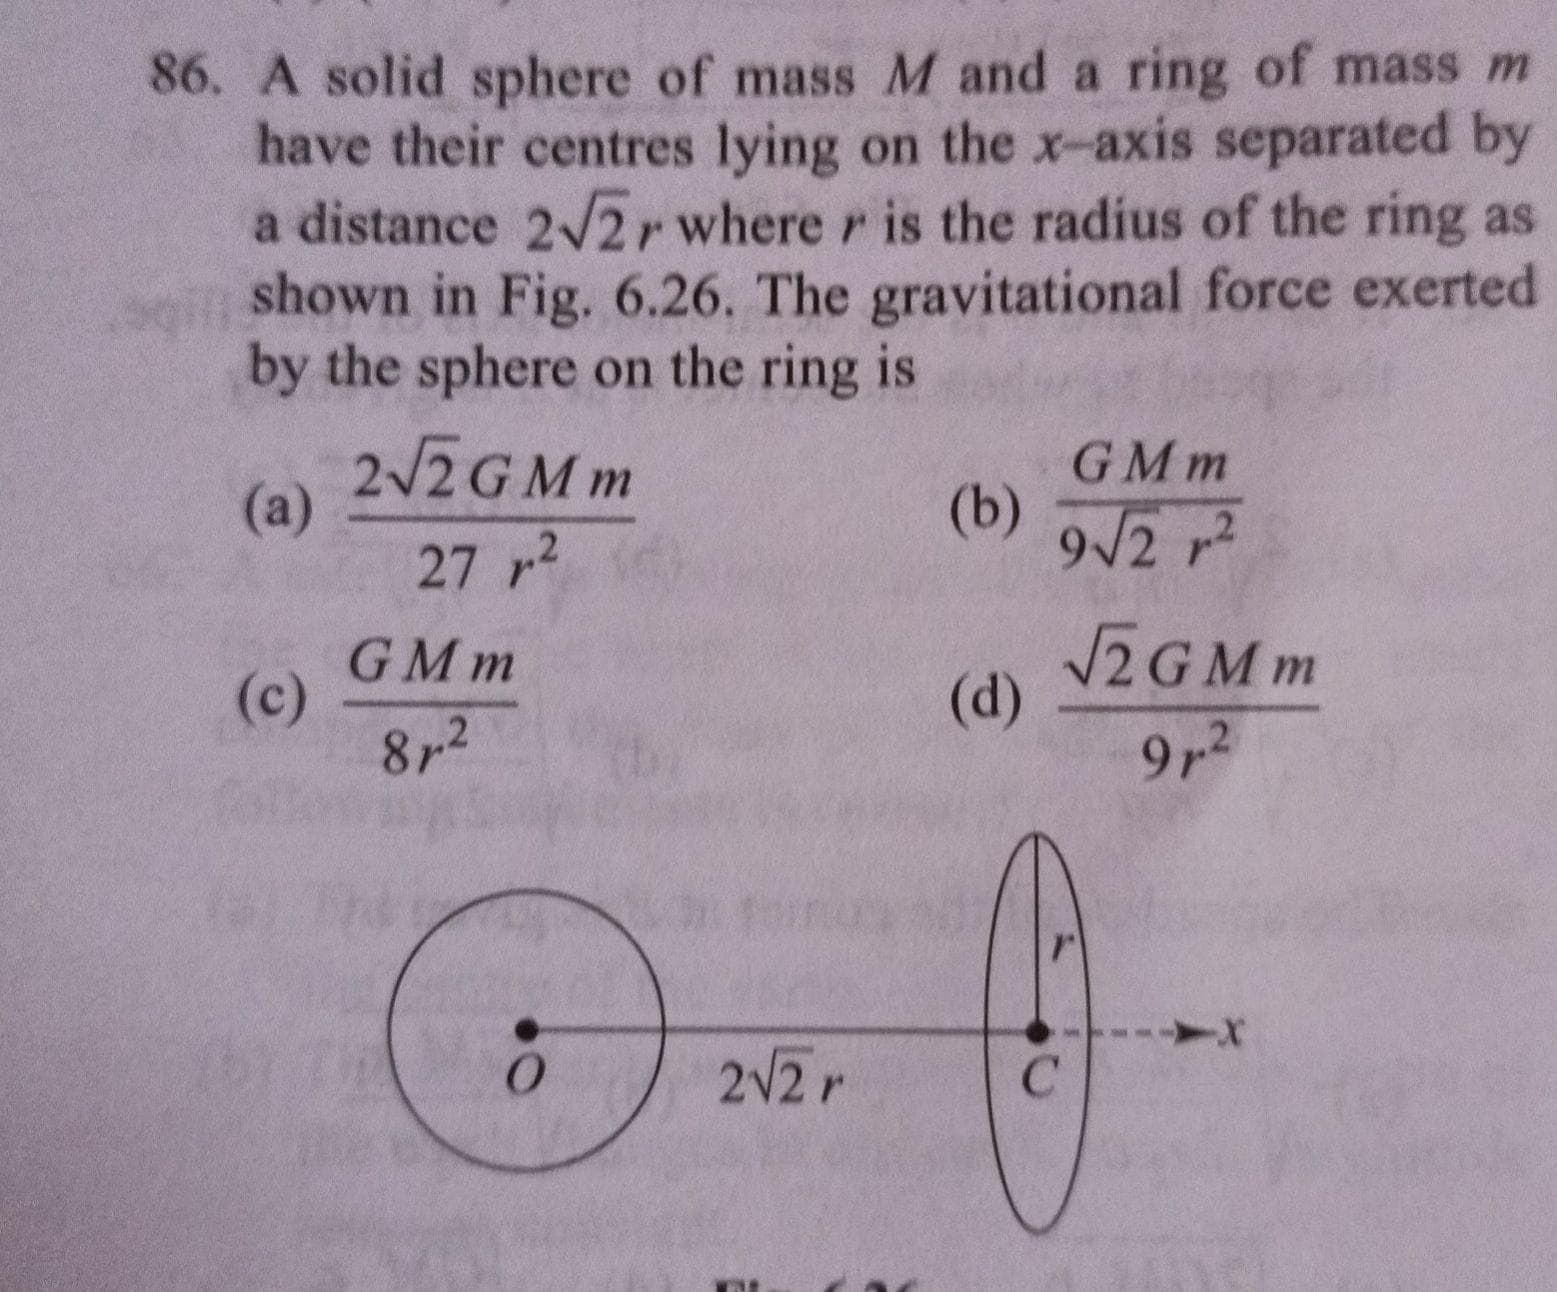 86. A solid sphere of mass M and a ring of mass m
have their centres lying on the x-axis separated by
a distance 2/2r where r is the radius of the ring as
shown in Fig. 6.26. The gravitational force exerted
by the sphere on the ring is
2/2GMM
(a)
GMm
(b)
9/2 ,2
27 r2
GMm
(c)
872
ZGM m
(d)
9r2
2V2r
